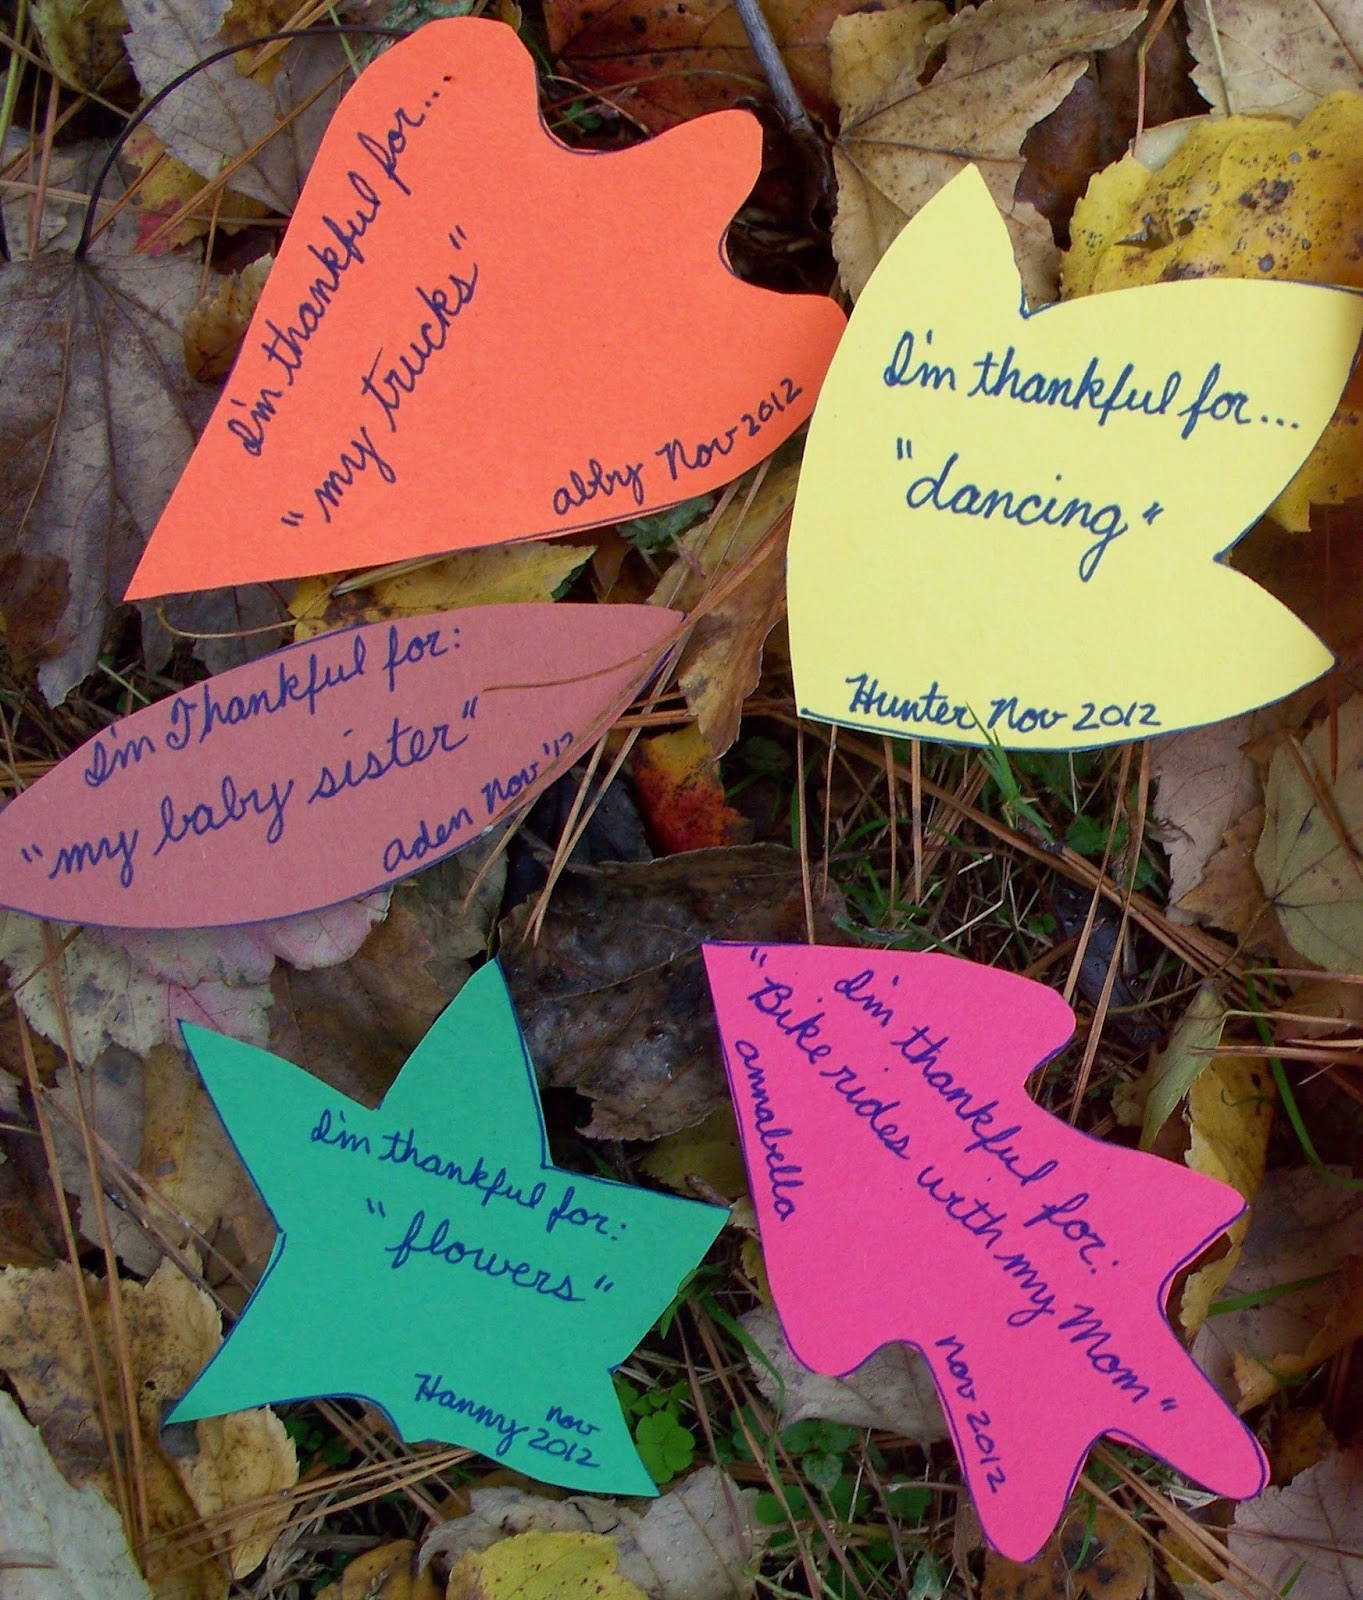 Each leaf lists something that the child is thankful for. 